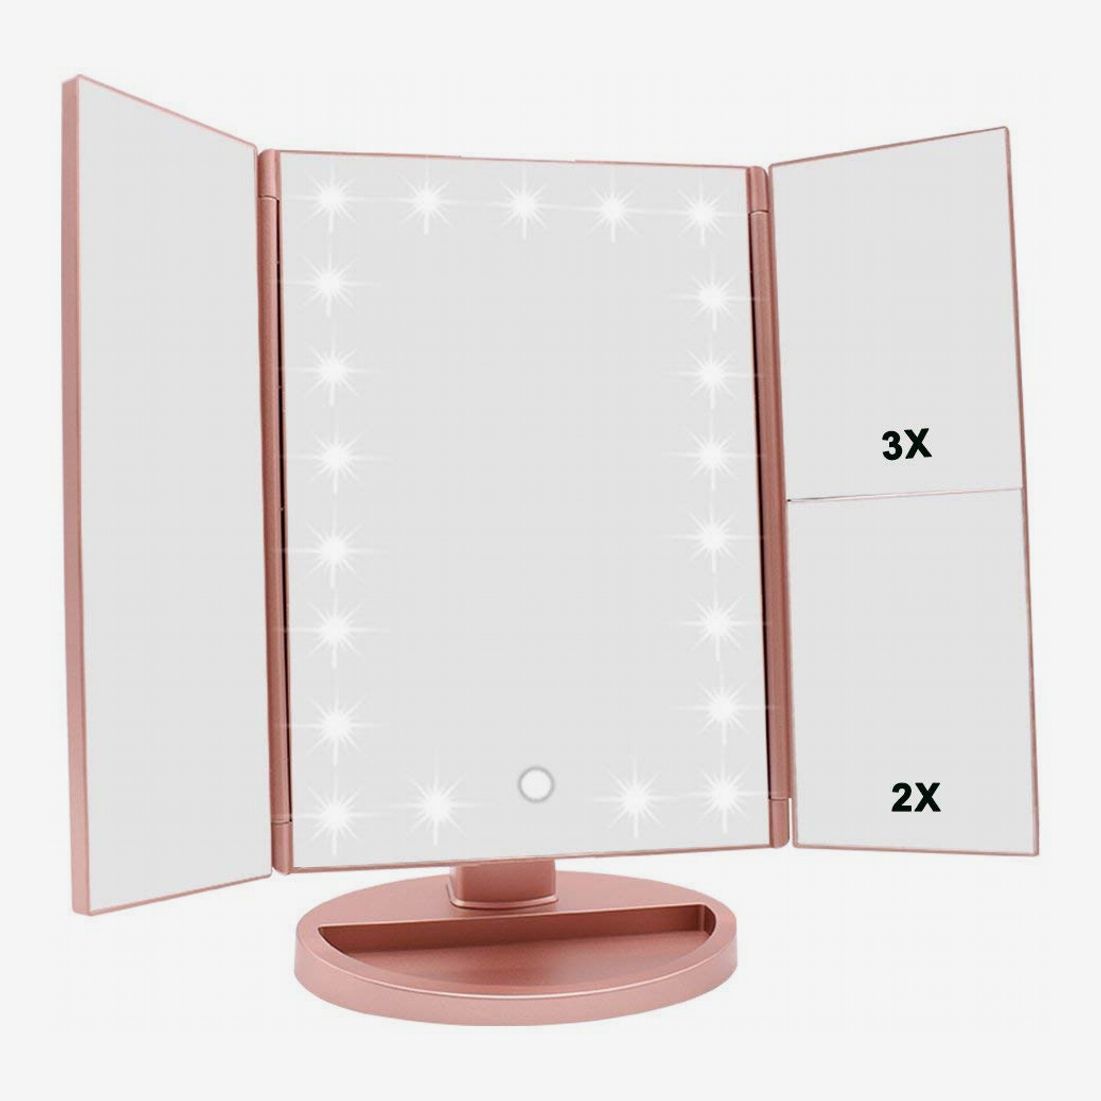 14 Best Lighted Makeup Mirrors 2021, Square Light Up Makeup Mirror